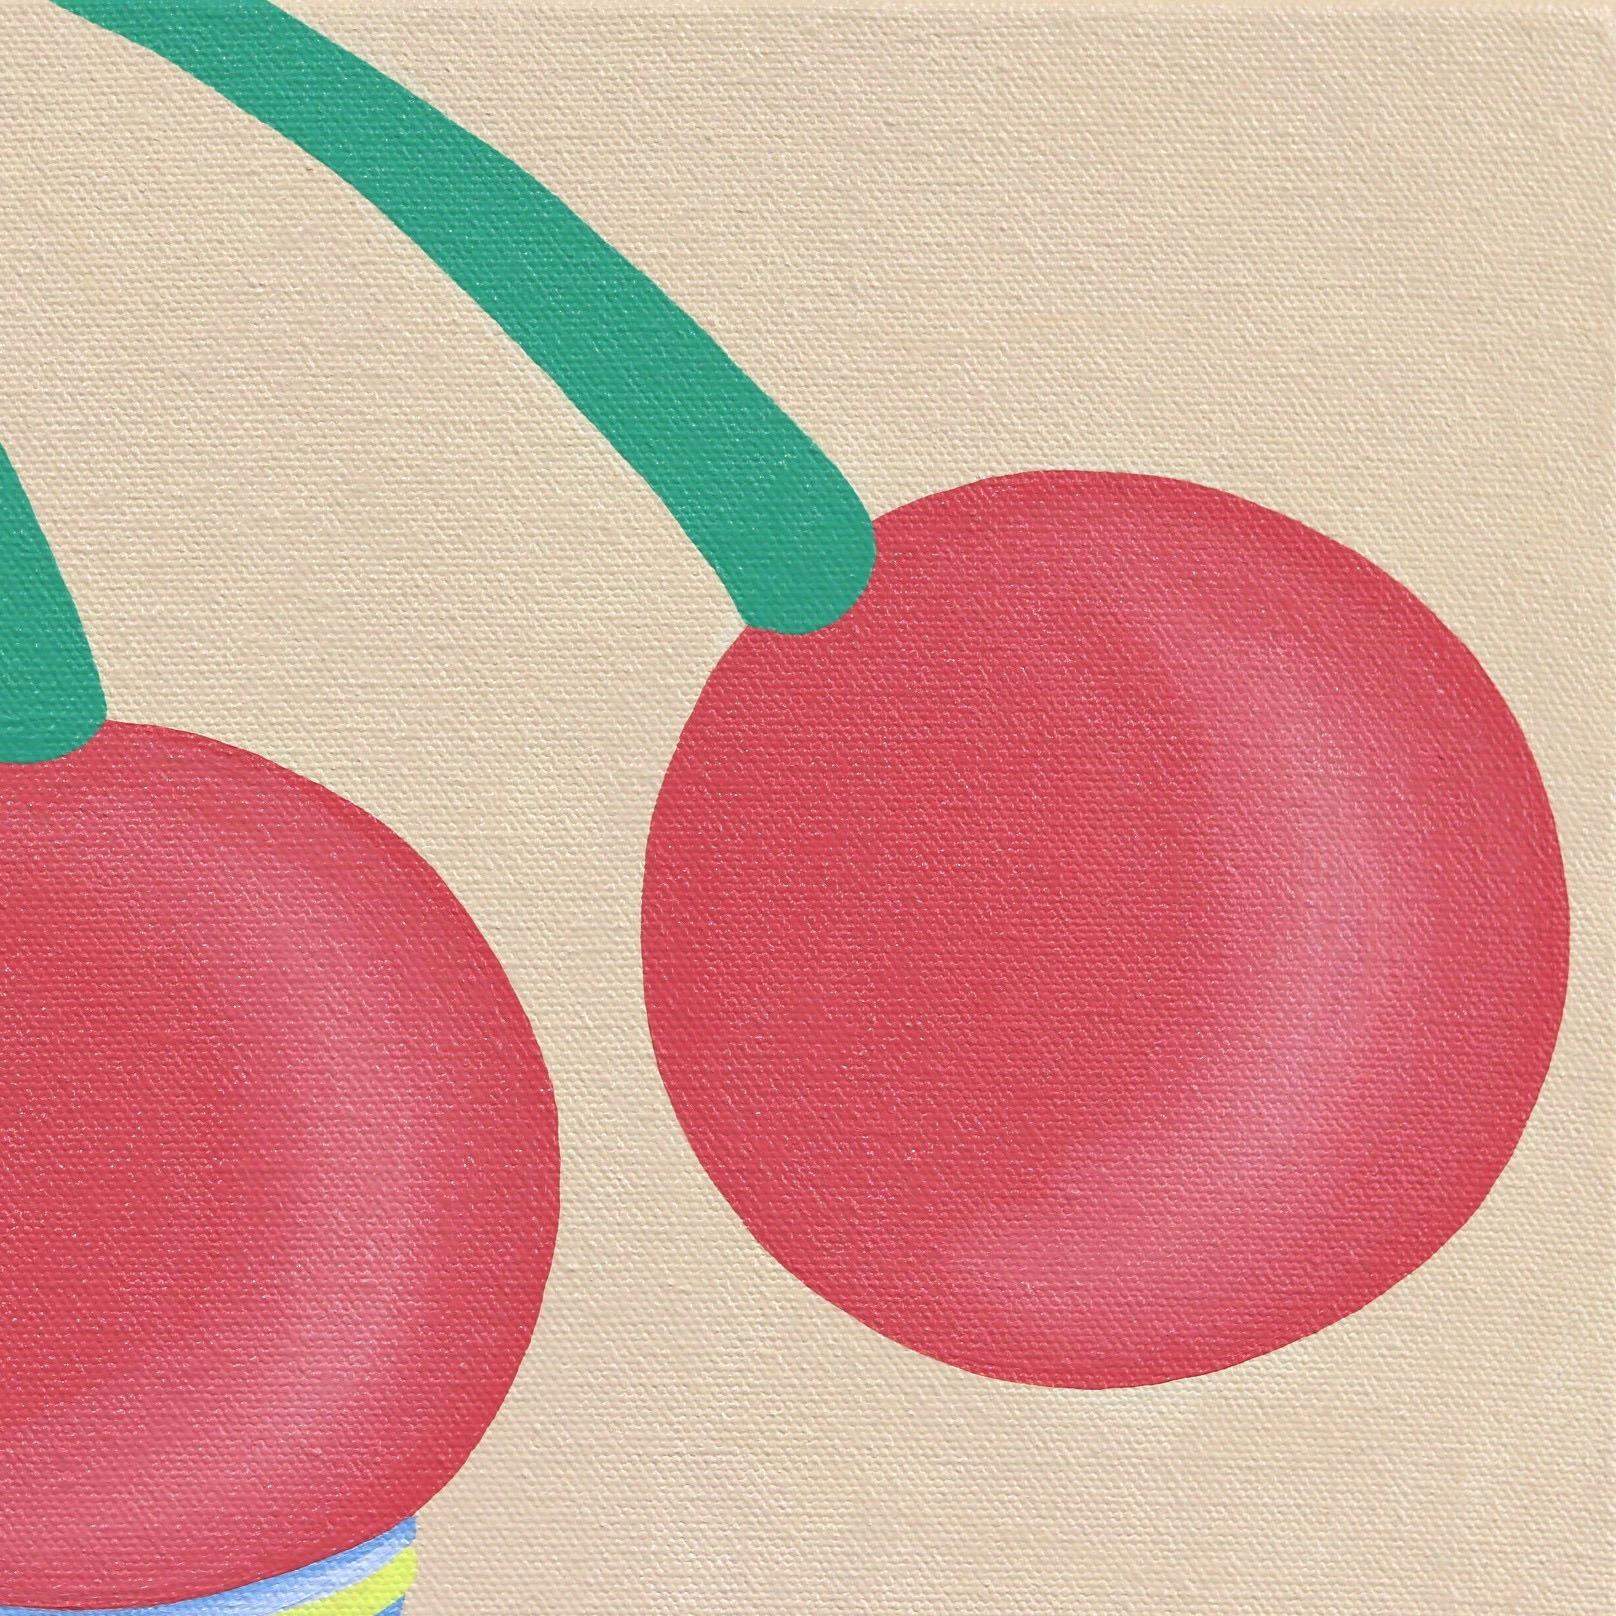 Cherry Bliss - Original Red Cherries Still Life Painting  For Sale 1